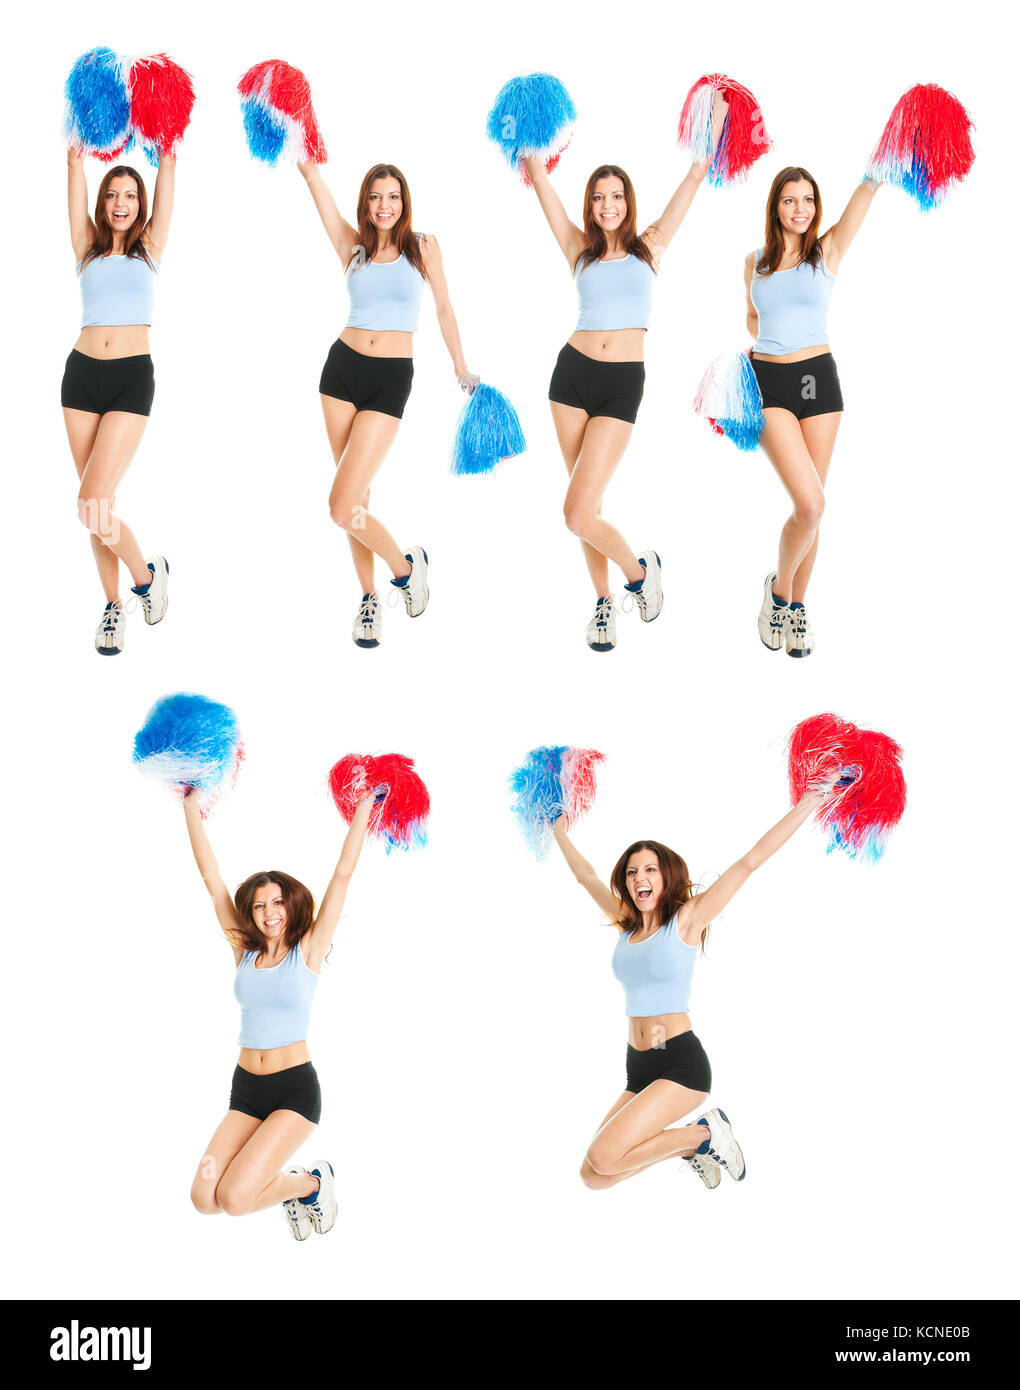 Set of photos with beautiful cheerleader. Isolated on white background Stock Photo